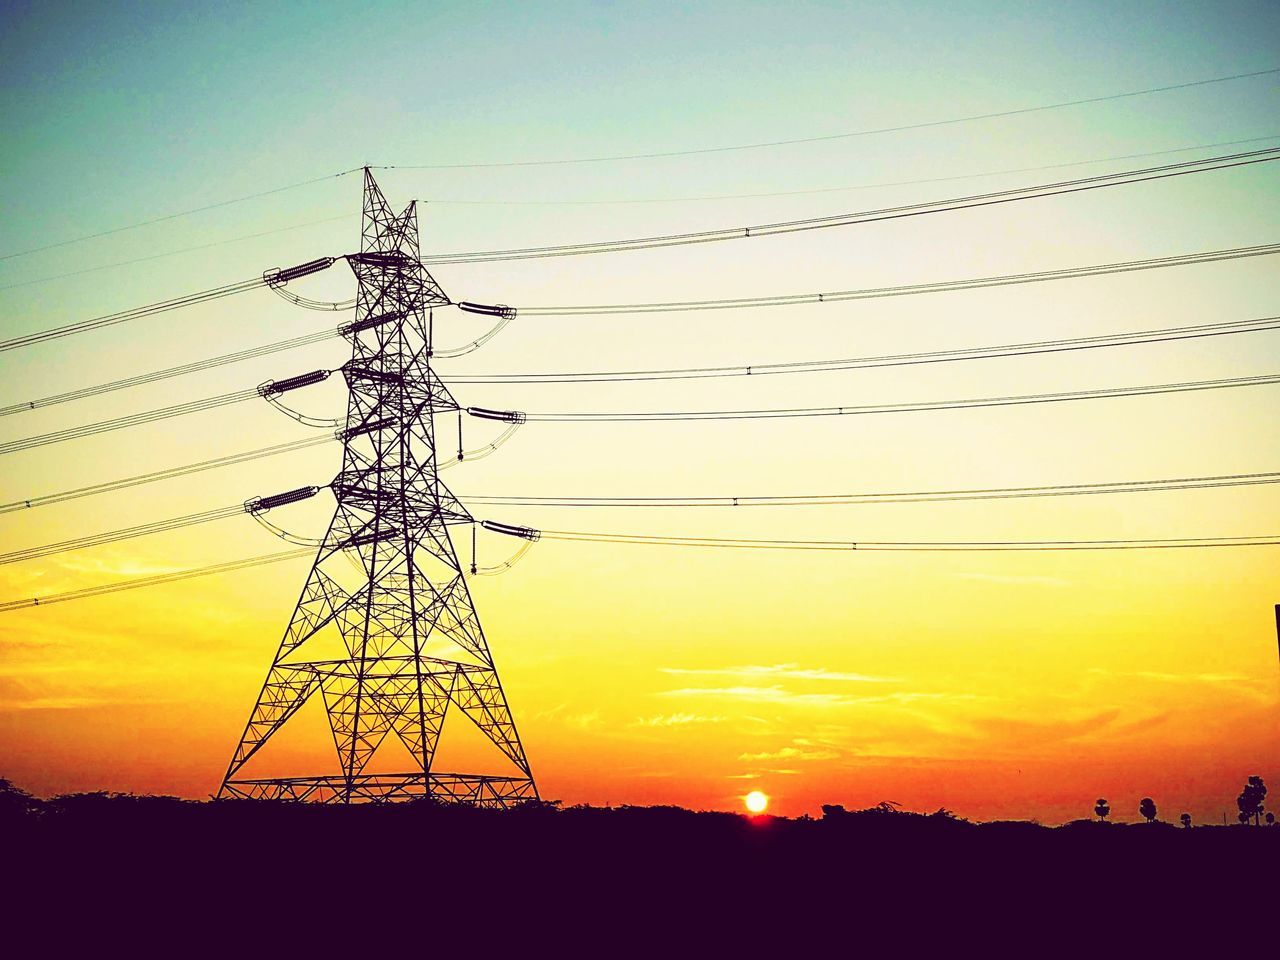 LOW ANGLE VIEW OF SILHOUETTE ELECTRICITY PYLONS AGAINST ROMANTIC SKY